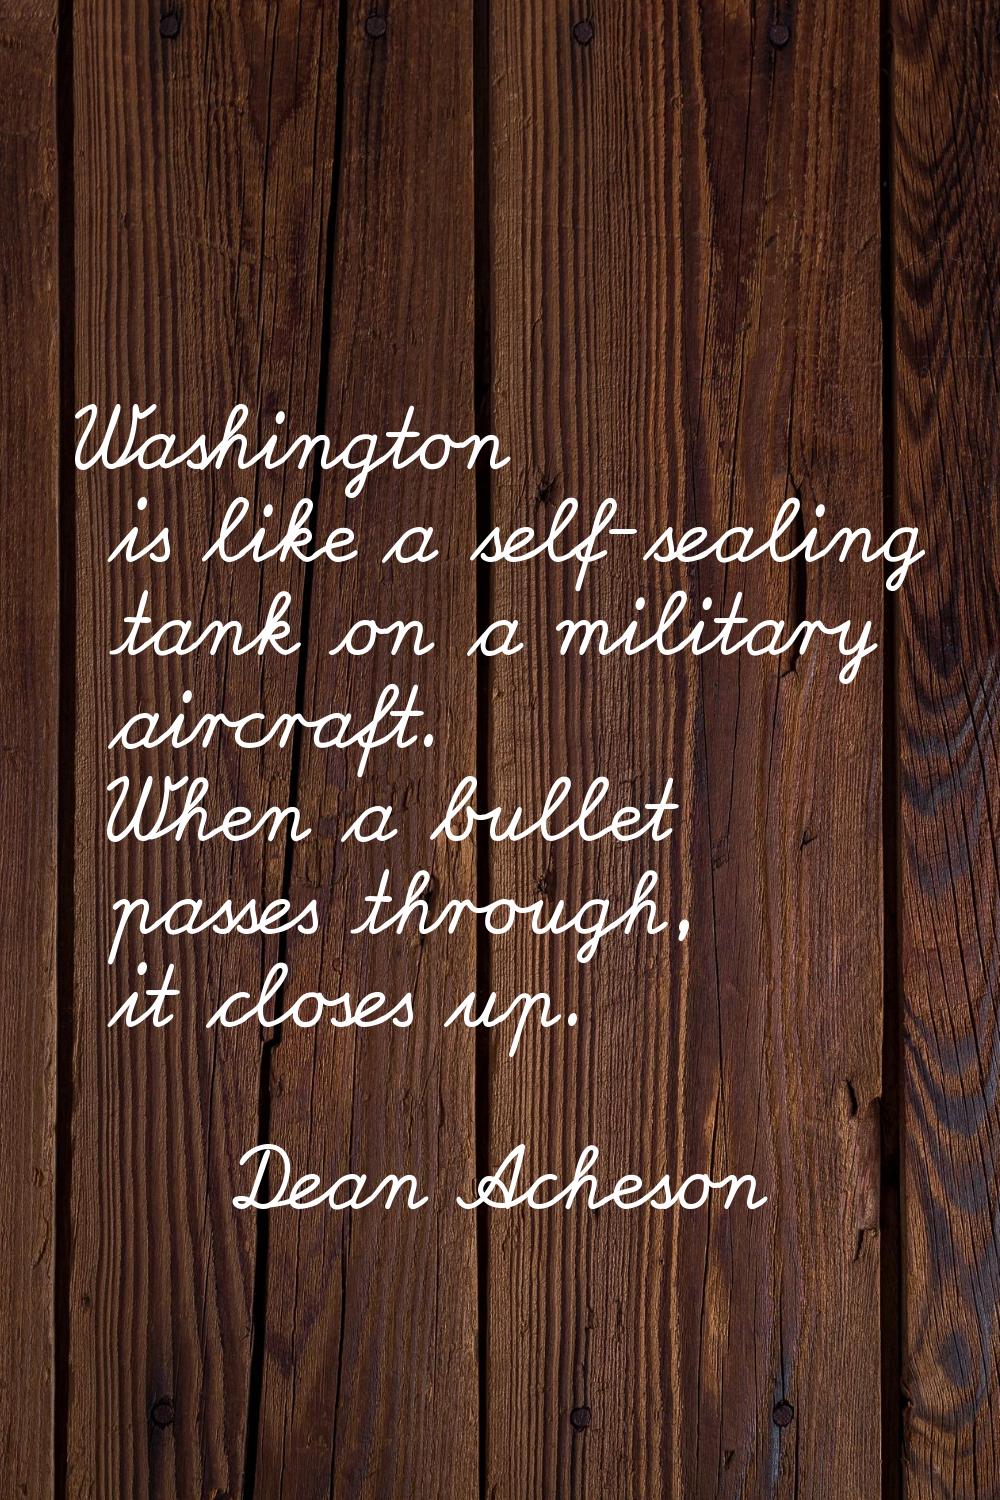 Washington is like a self-sealing tank on a military aircraft. When a bullet passes through, it clo